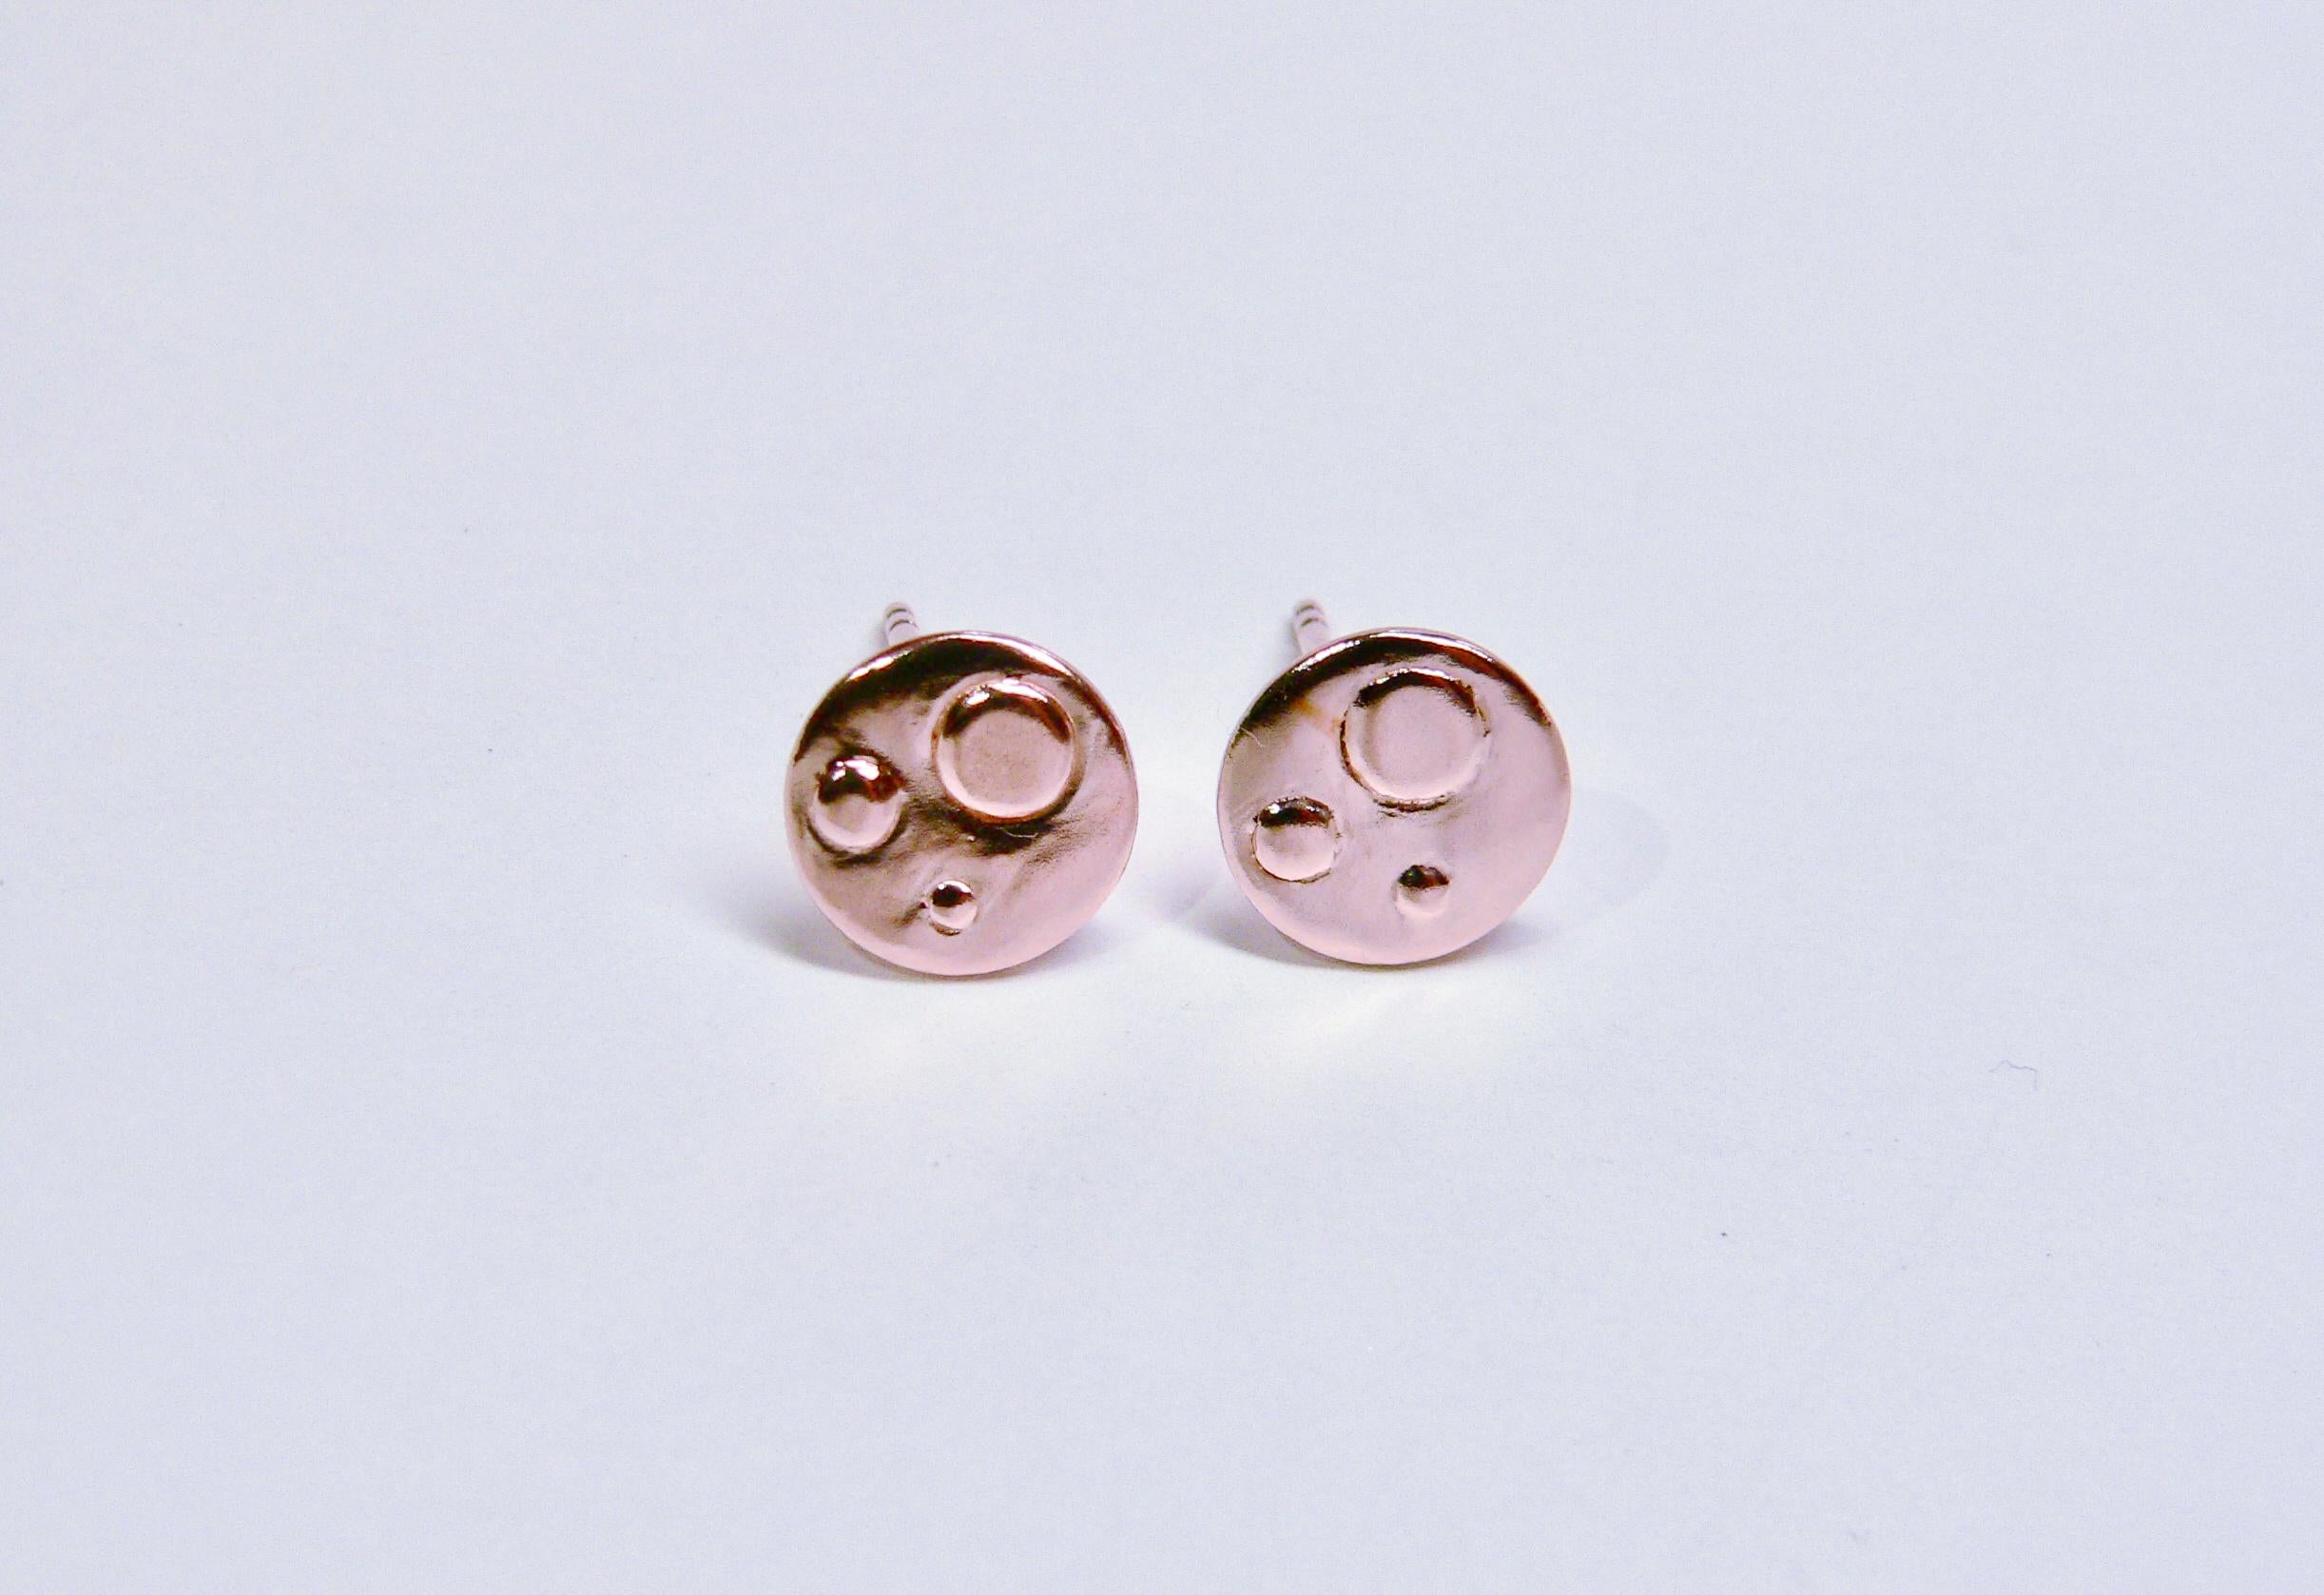 Artist Three Dots Stud Earring (Pair), Pink Gold-Plated Sterling Silver For Sale